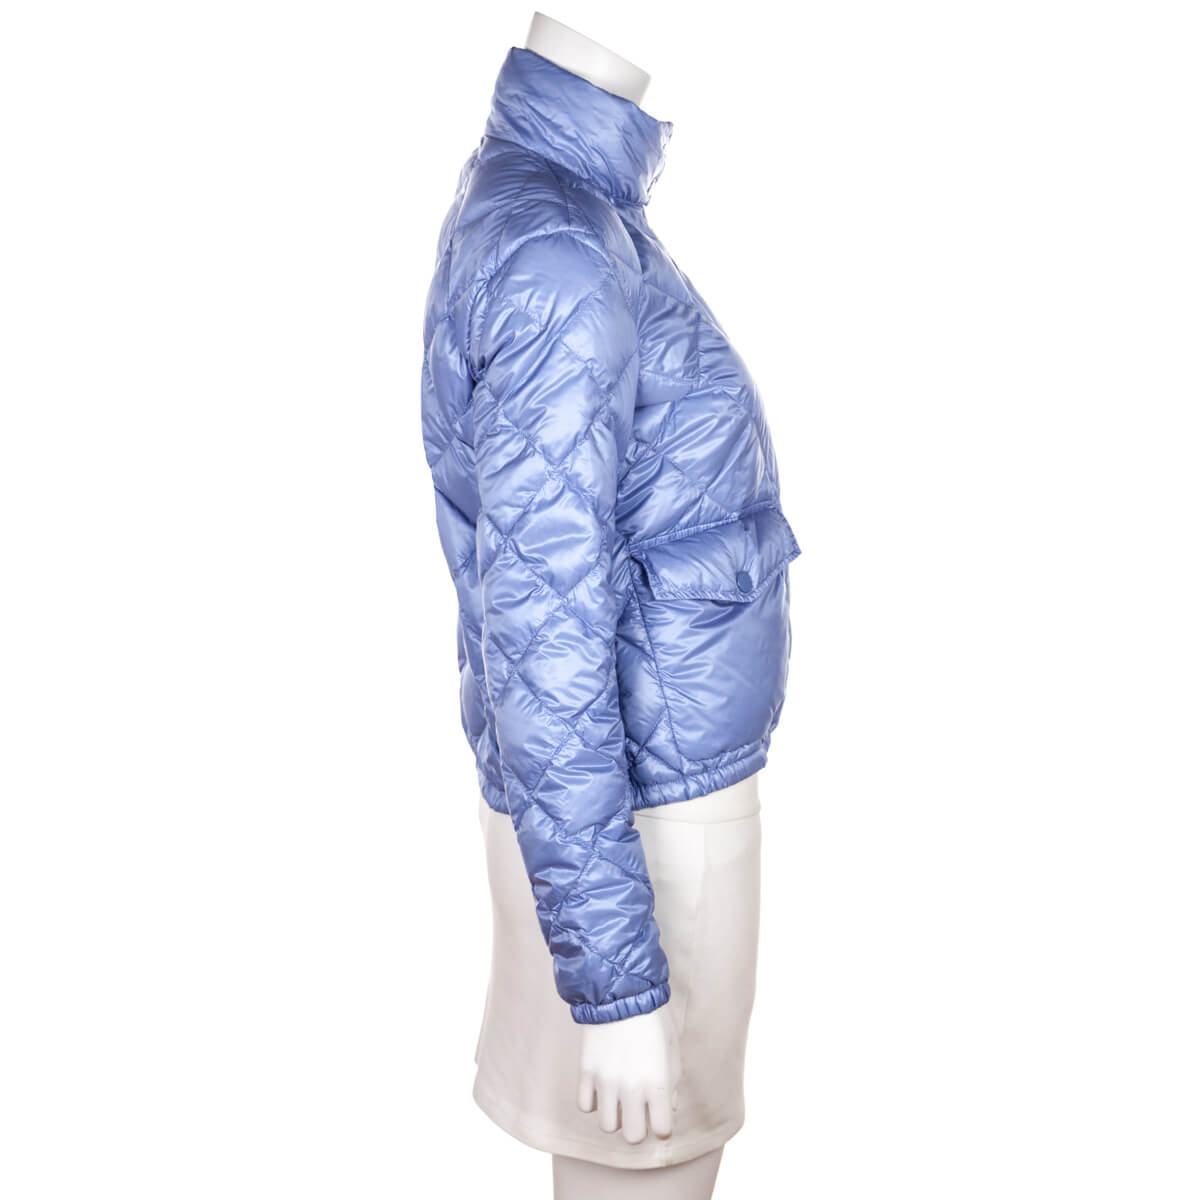 Moncler Blue Diamond Quilted Binic Giubbottto Down Jacket Size M | 2 - Love that Bag etc - Preowned Authentic Designer Handbags & Preloved Fashions